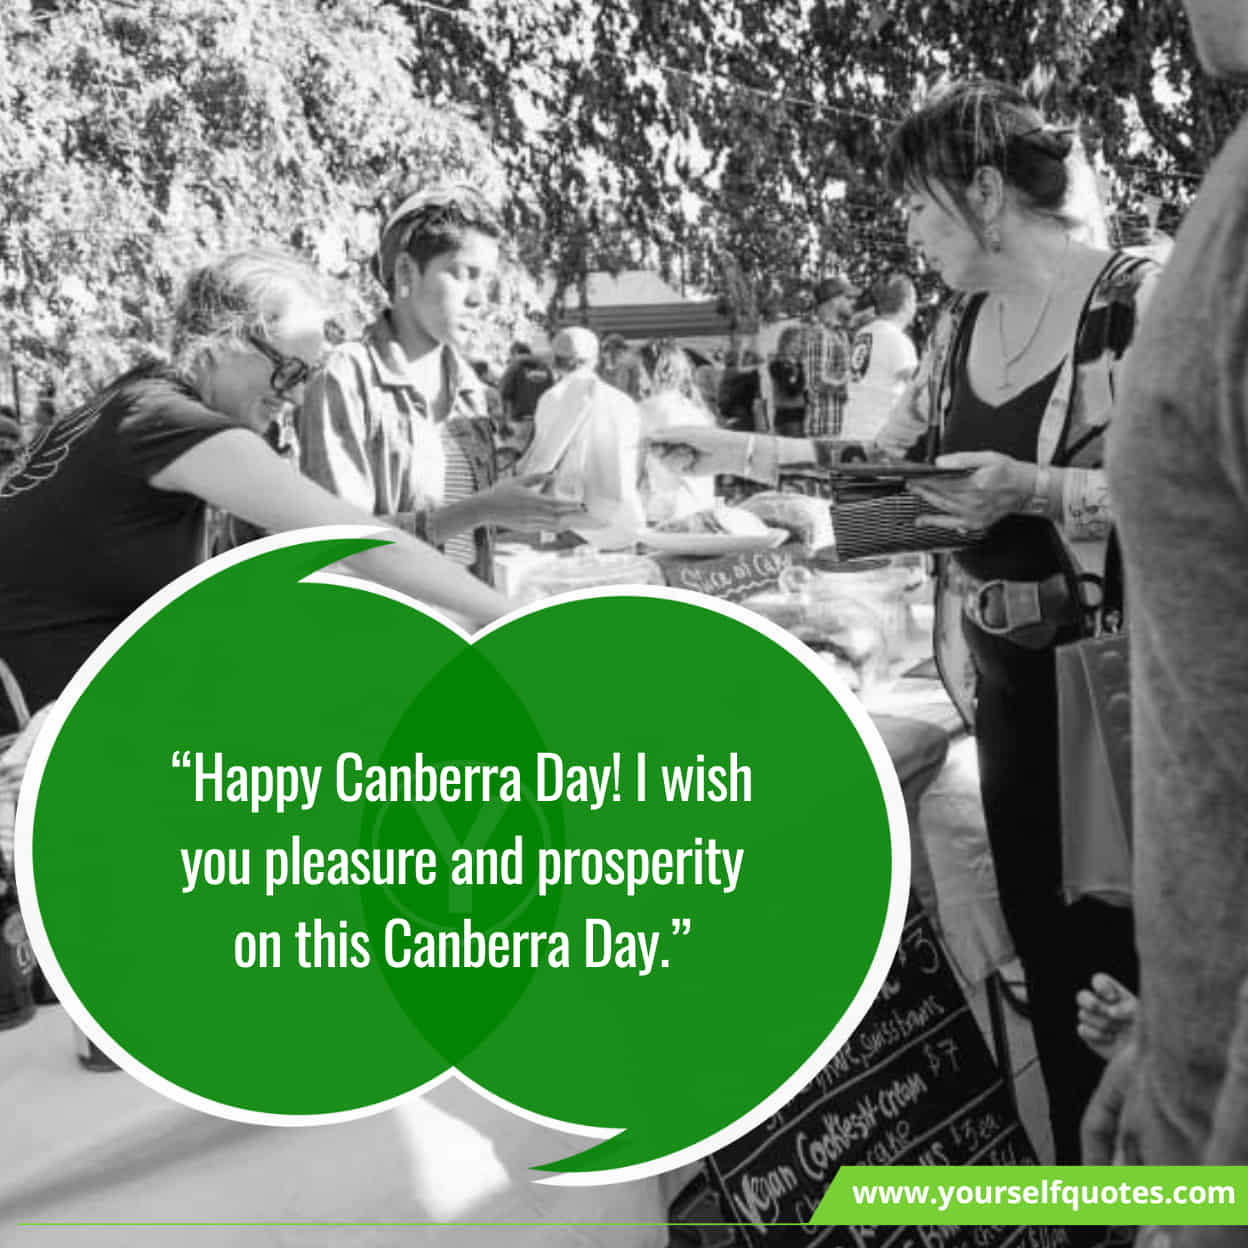 Happy Canberra Day Wishes, Quotes and Greeting